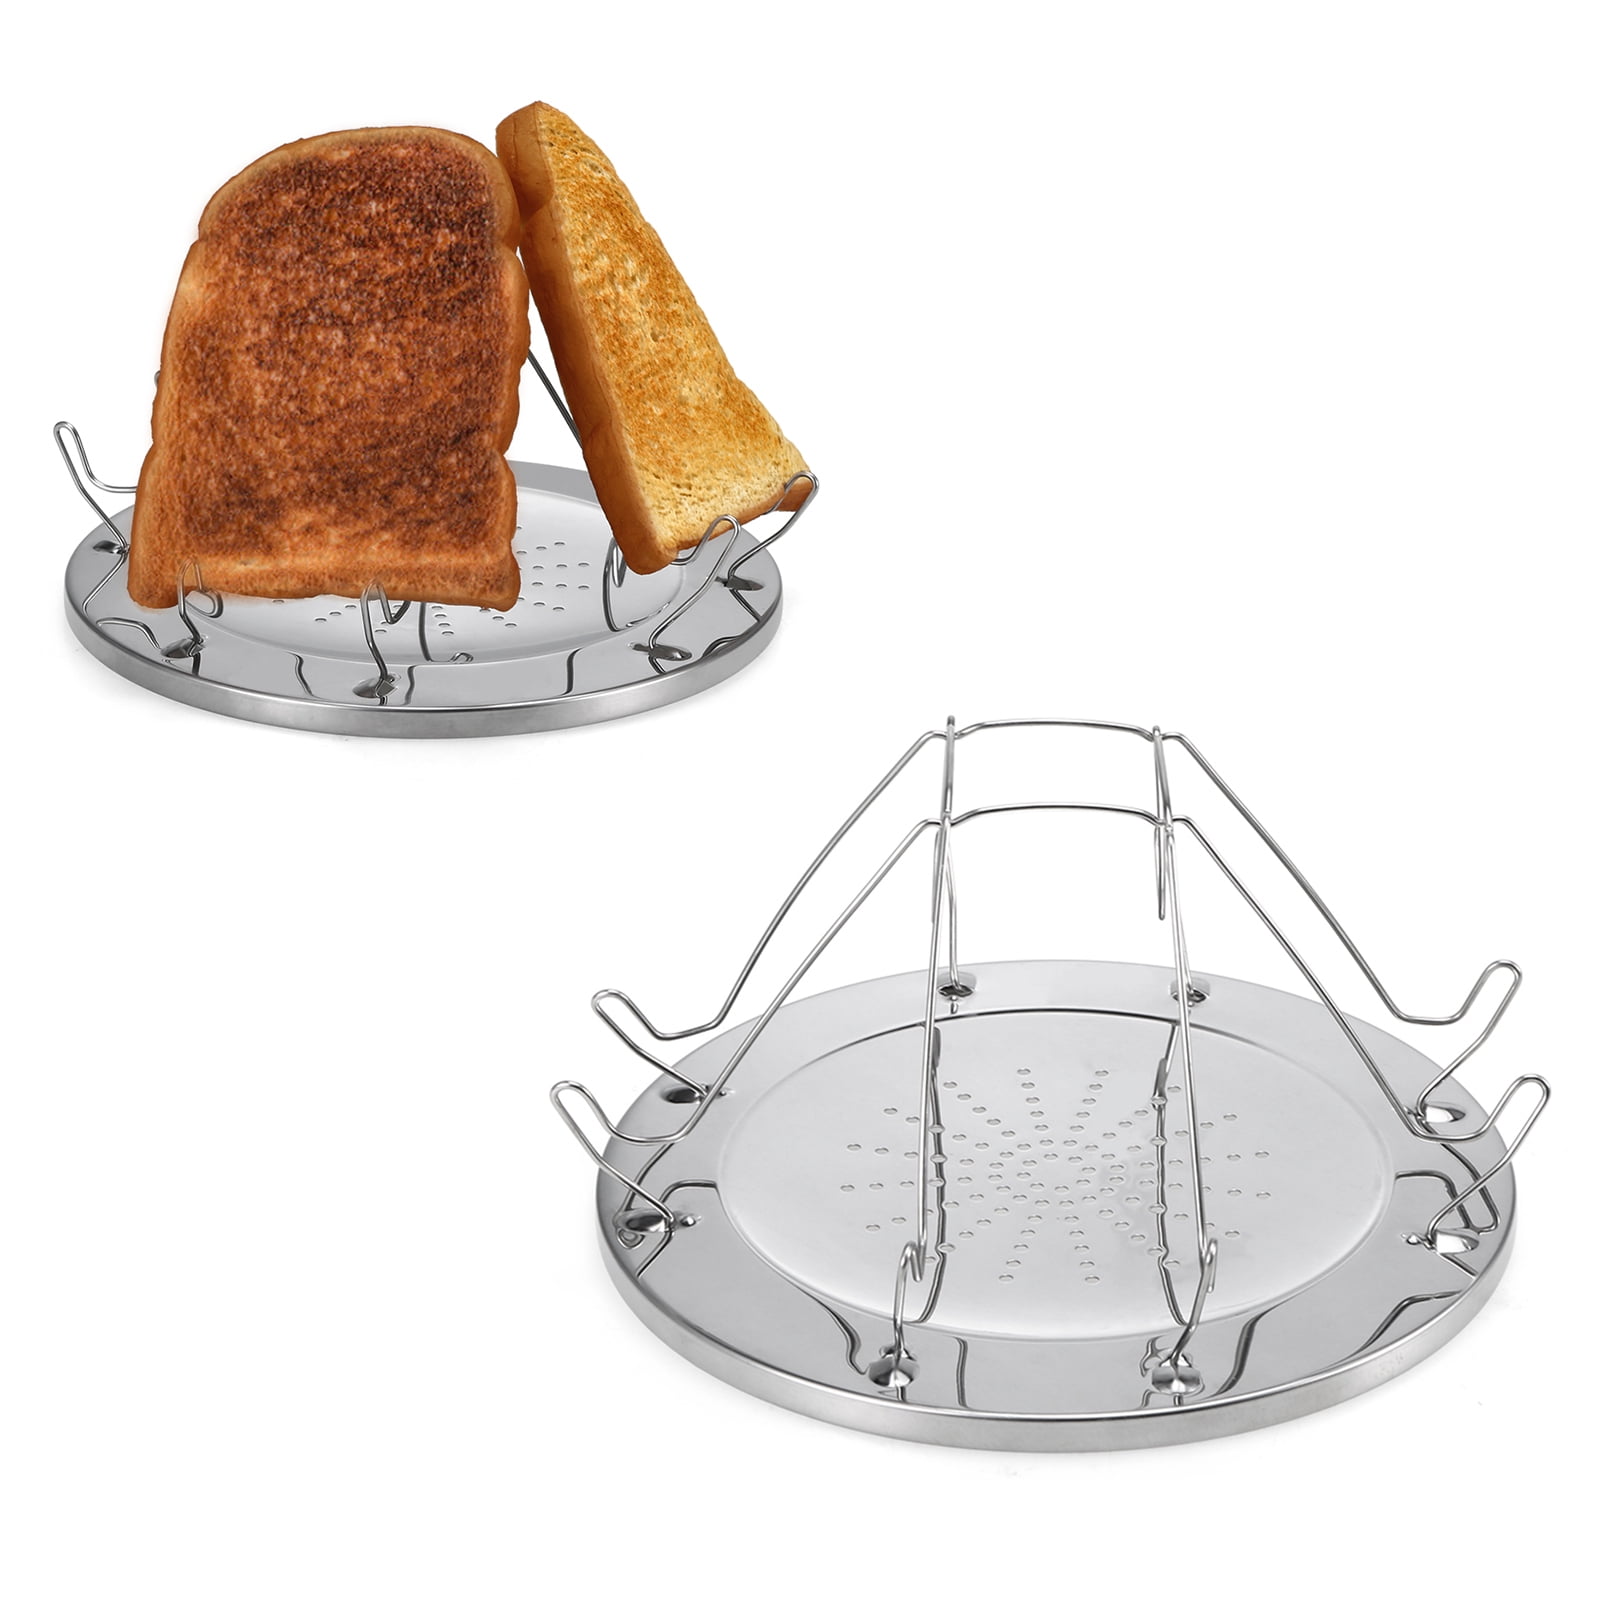 4 Slice Folding Toaster Camping Bread Toast Tray Foldable Cooking Toast Racks for Outdoor Camping Gas Stove